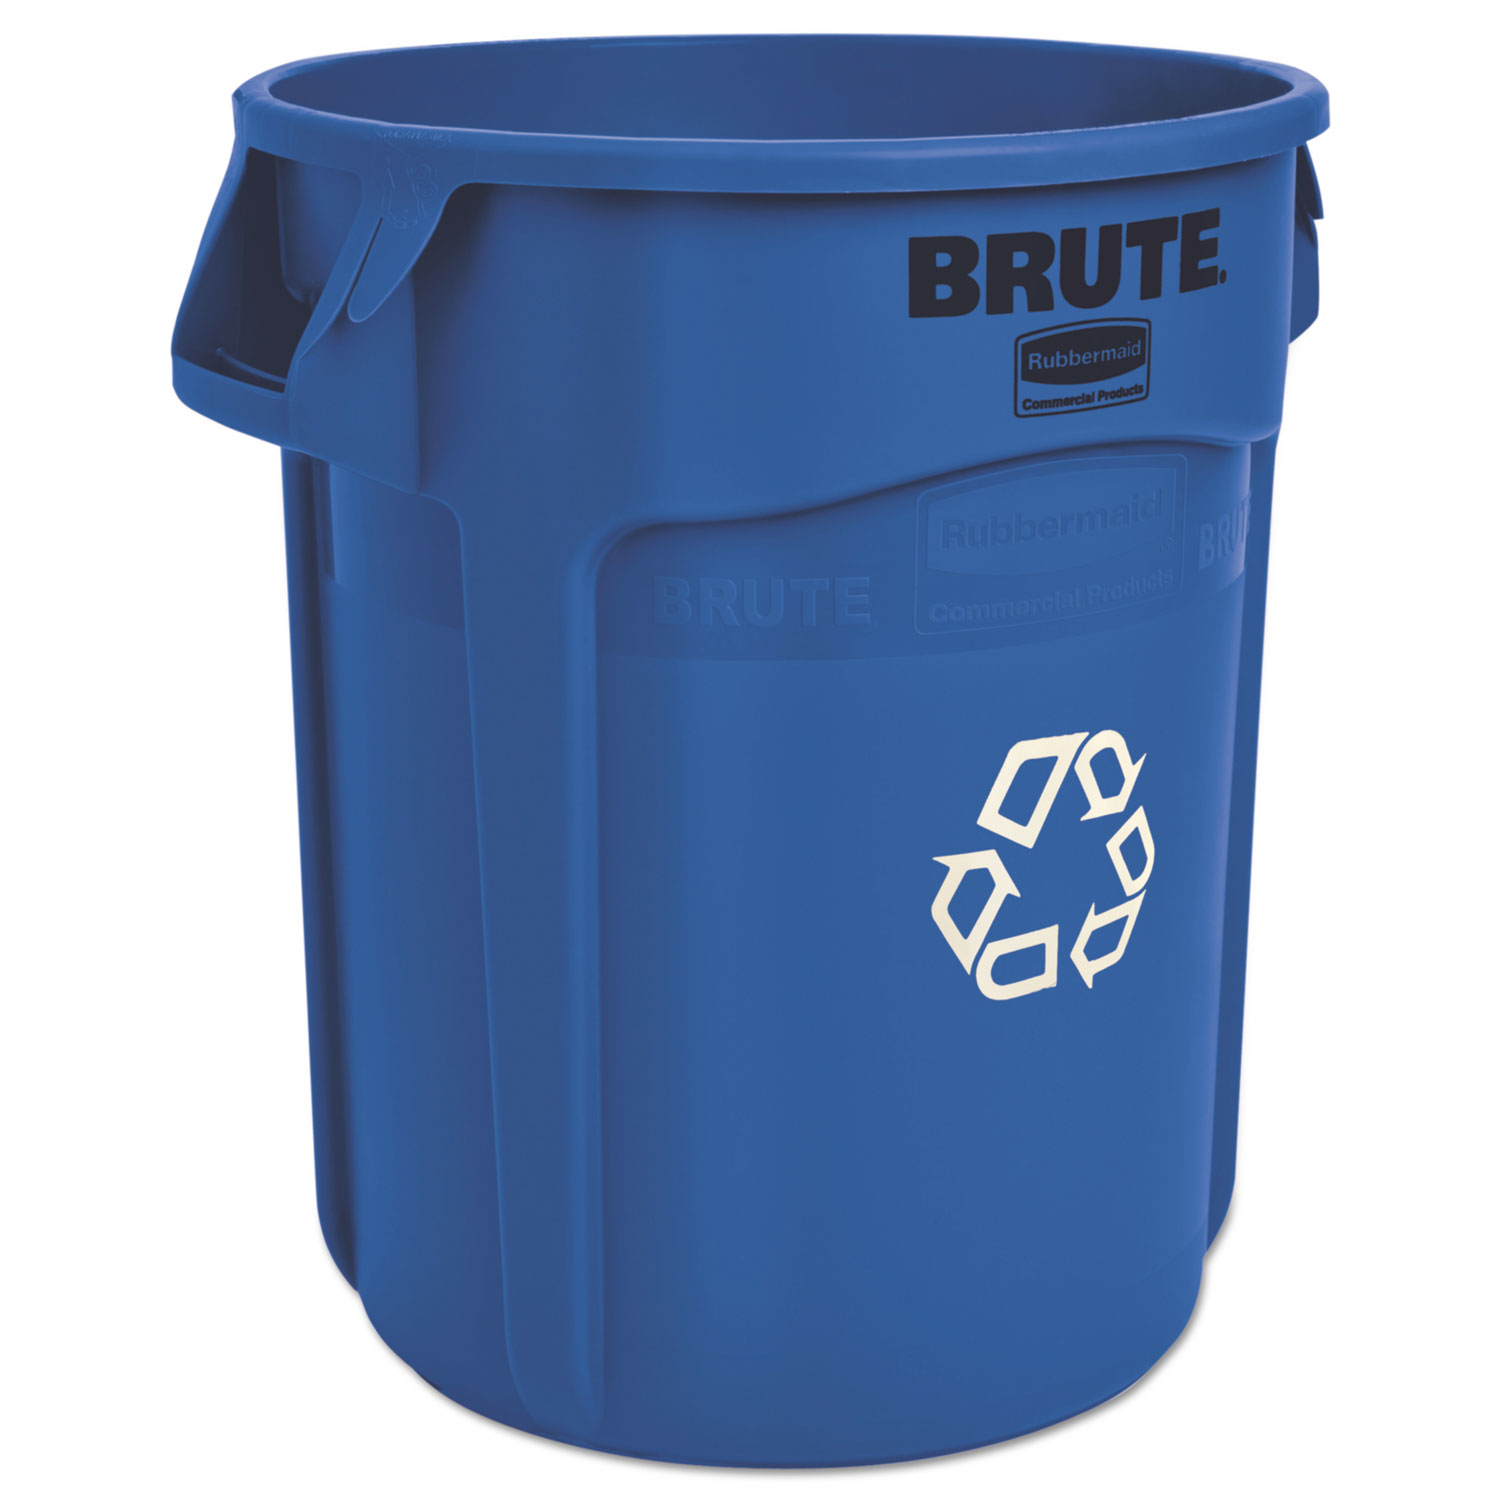  Rubbermaid Commercial FG262073BLUE Brute Recycling Container, Round, 20 gal, Blue (RCP262073BLU) 